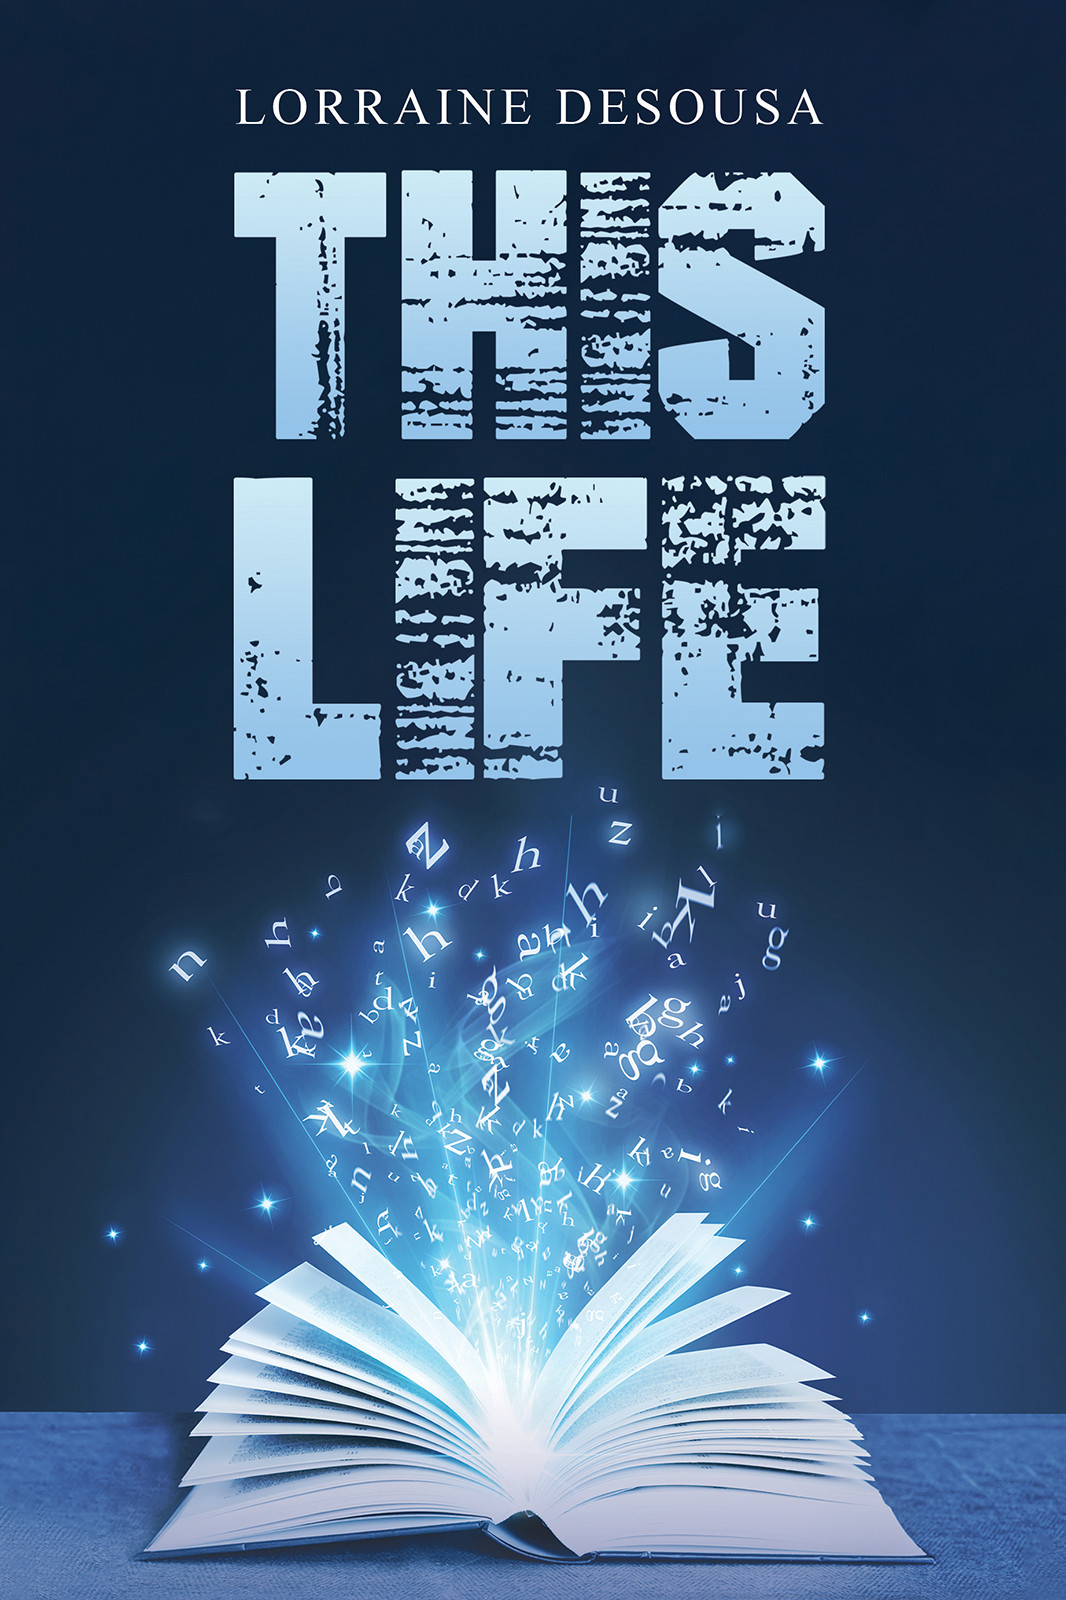 This Life-bookcover